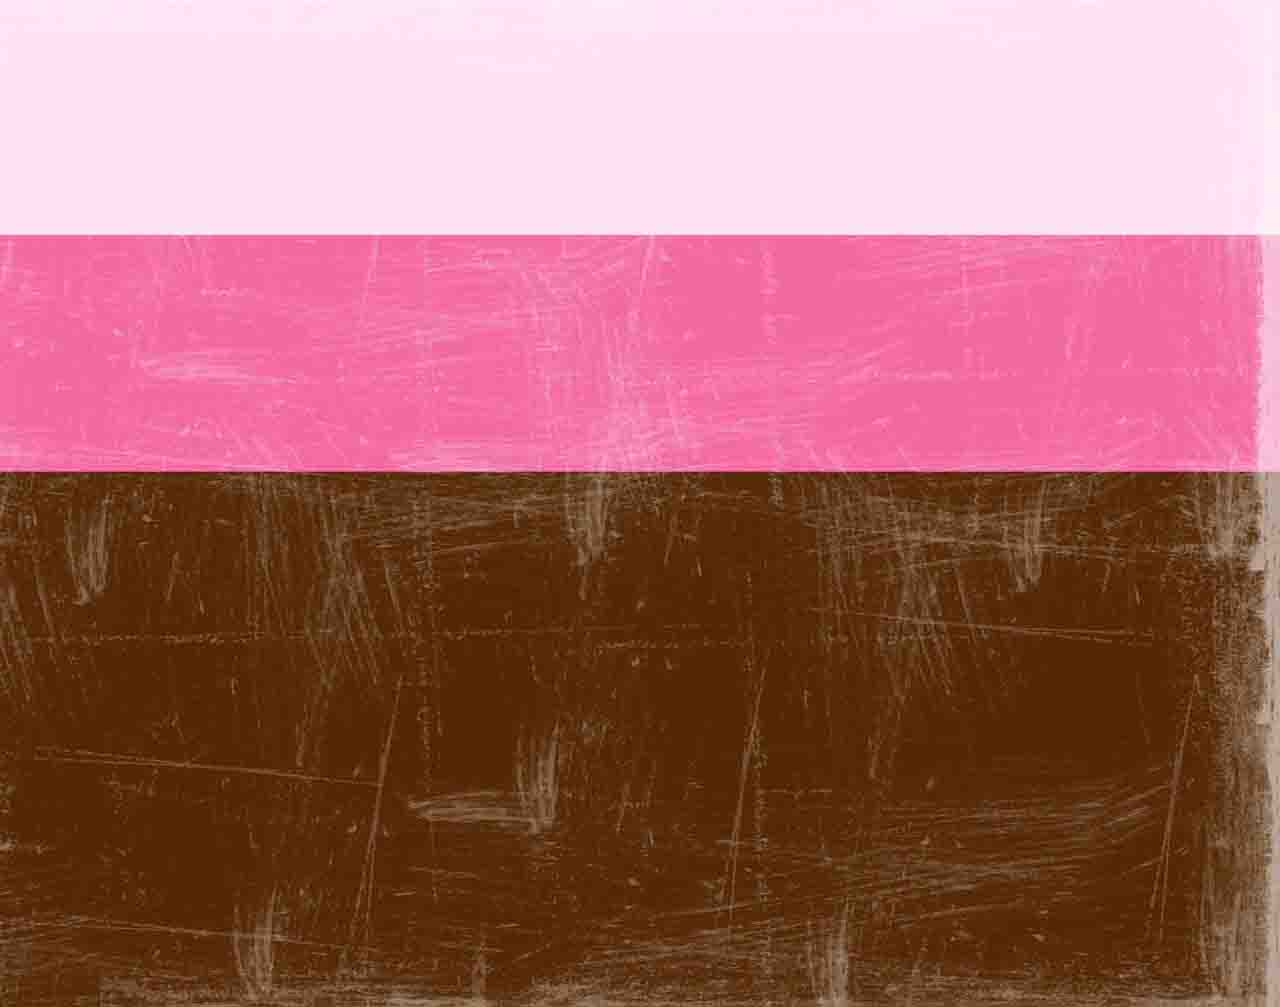 Pink and Brown Backgrounds